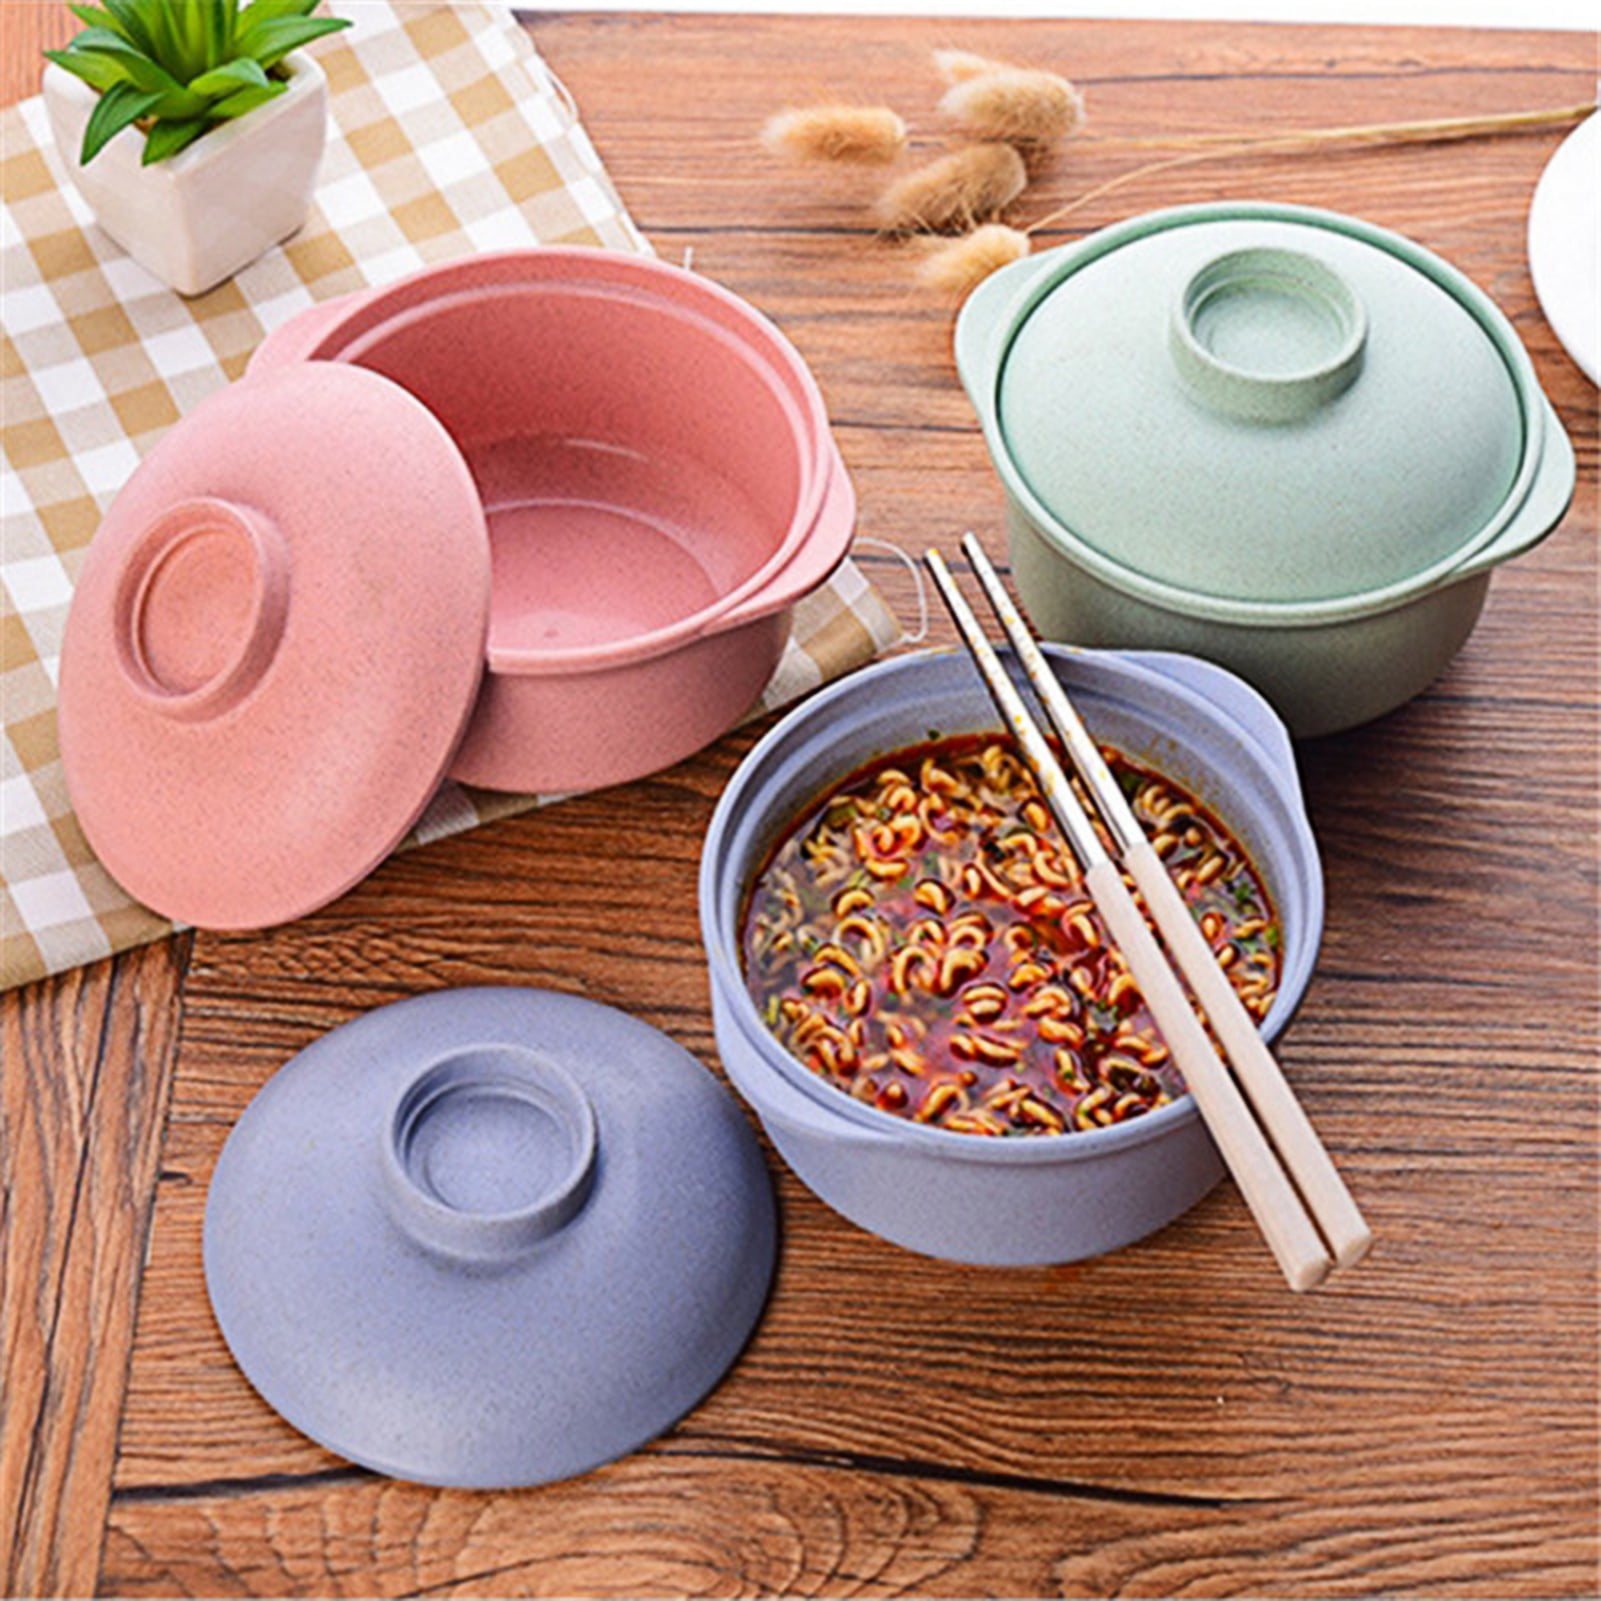  SIHKO Wheat Straw Cereal Bowls with Lids, Microwavable Bowls  with Lids, Storage and Serving Bowls with Lids, Small Mixing Bowls for  Kitchen, Salad and Soup Bowls with Lids, Set of 3 (